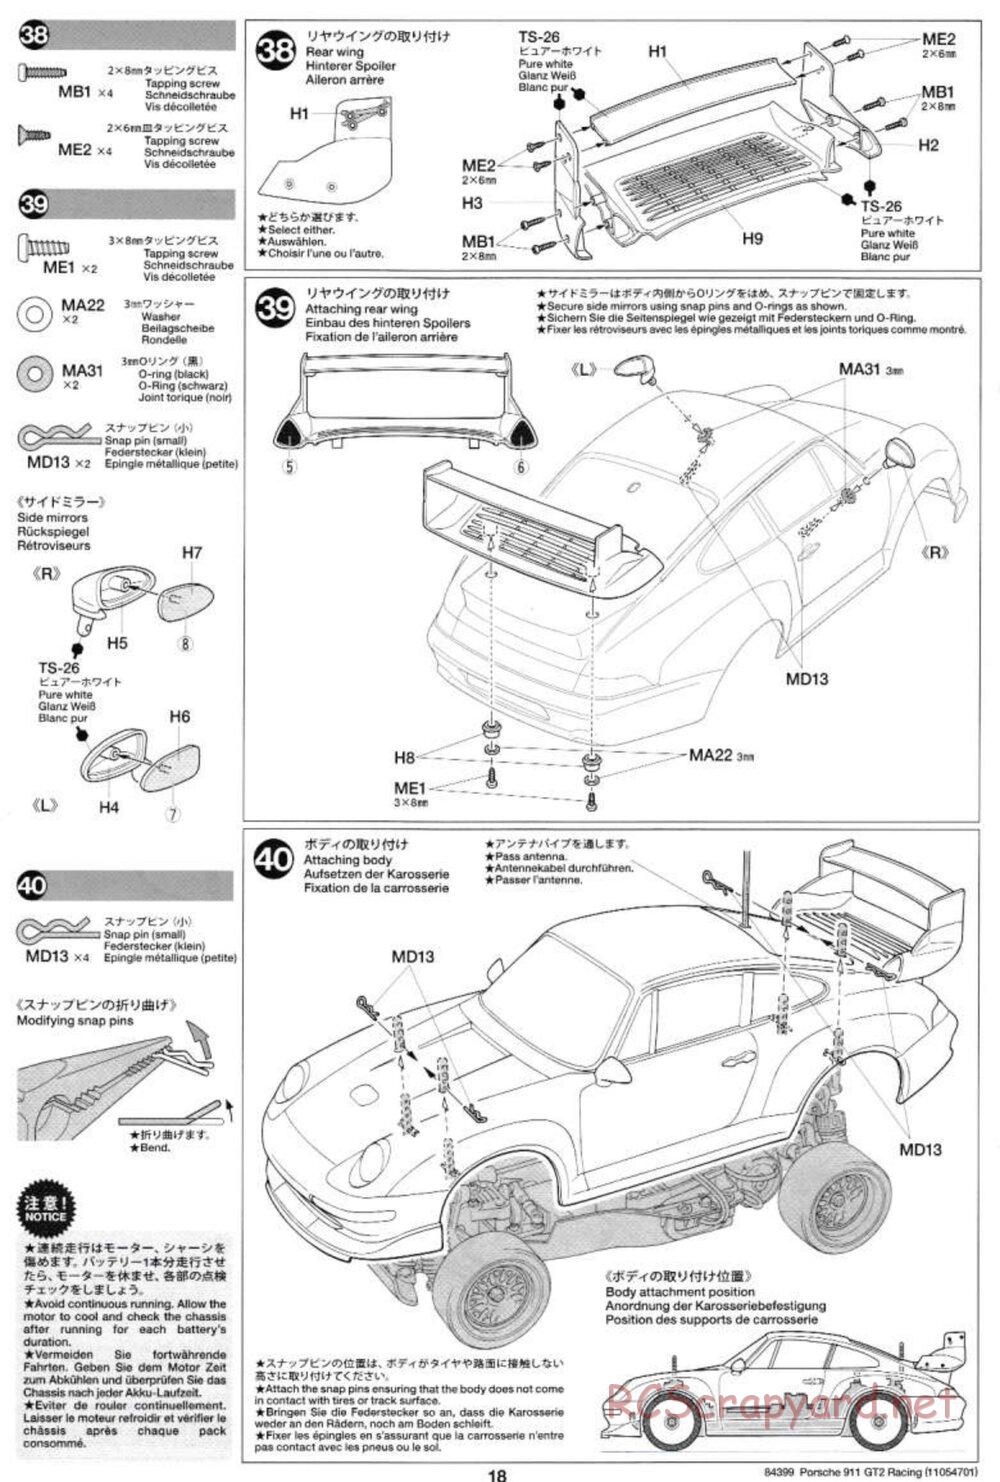 Tamiya - Porsche 911 GT2 Racing - TA-02SW Chassis - Manual - Page 18